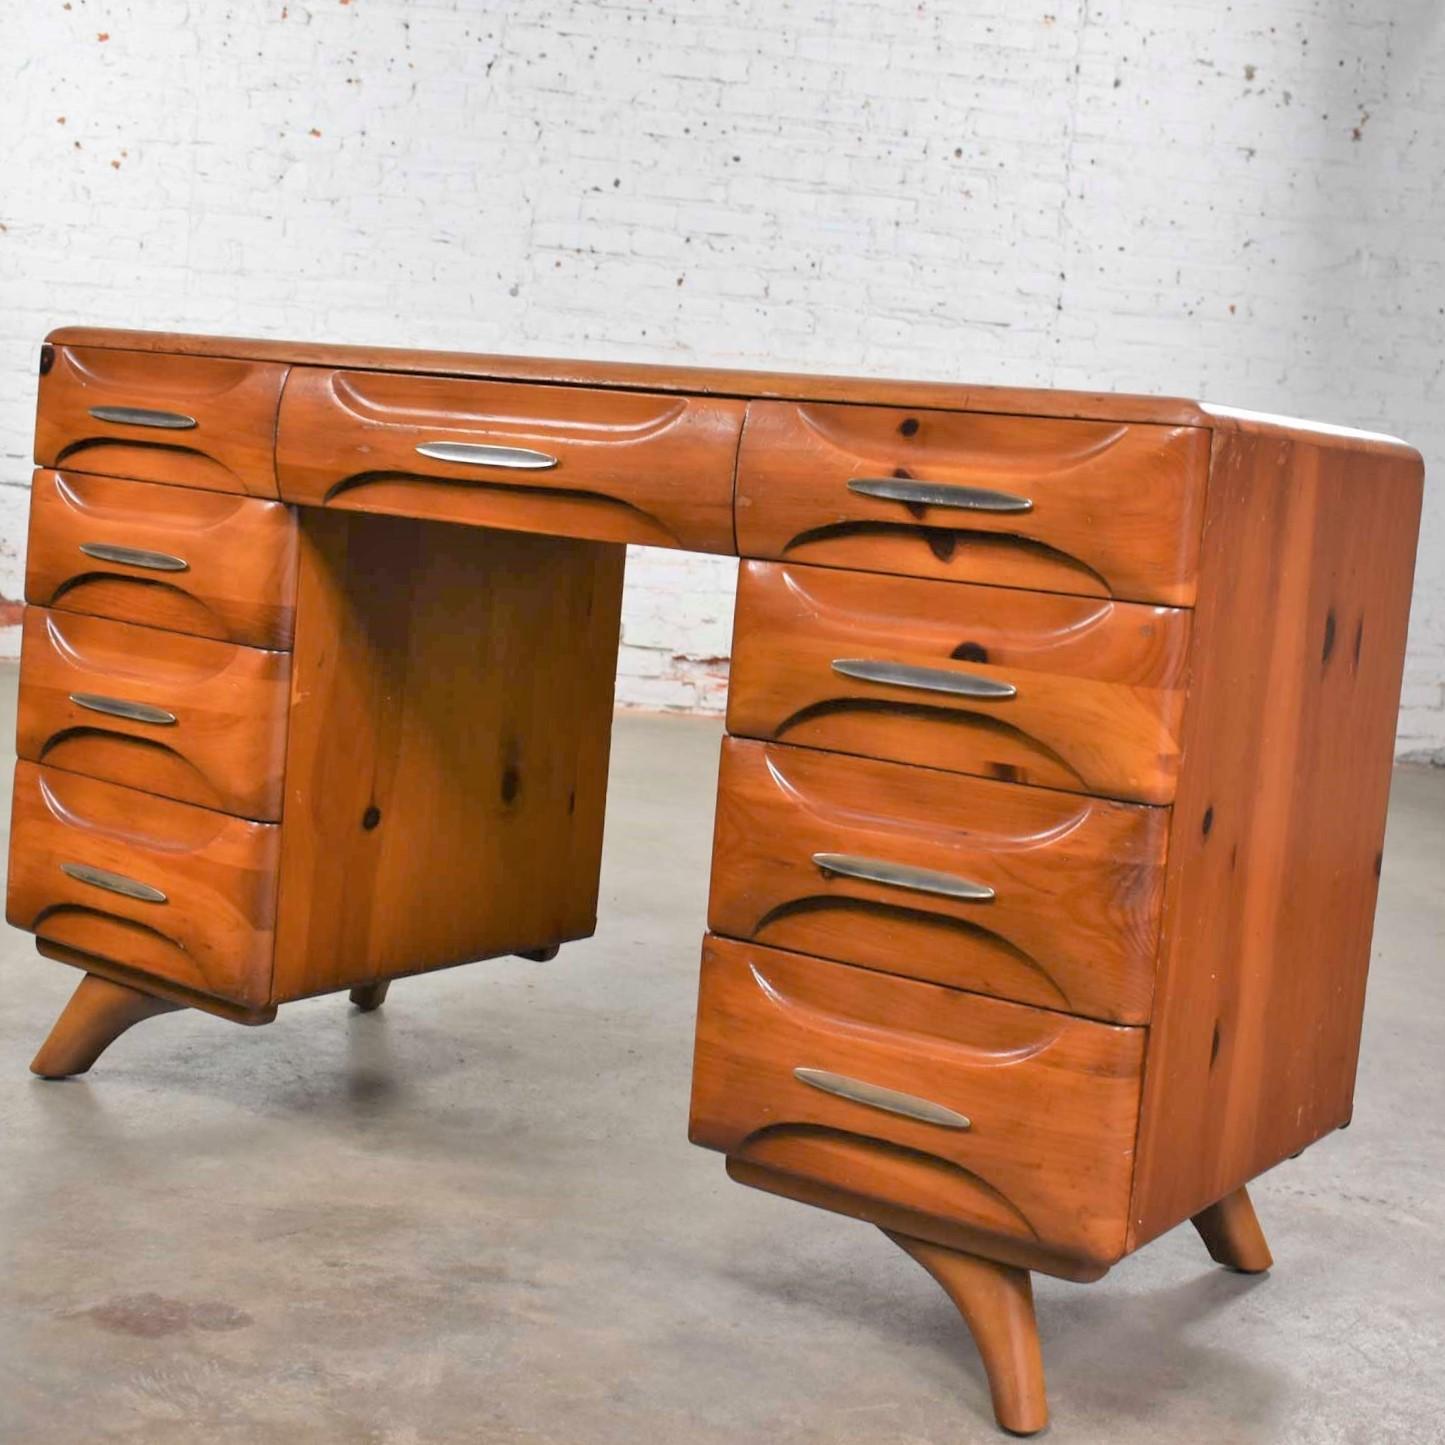 Handsome Mid-Century Modern double pedestal desk or vanity by Franklin Shockey Furniture from their Sculpted Pine Collection. In wonderful vintage condition. It does have some nicks and dings due to age and use but we have restored and touched up